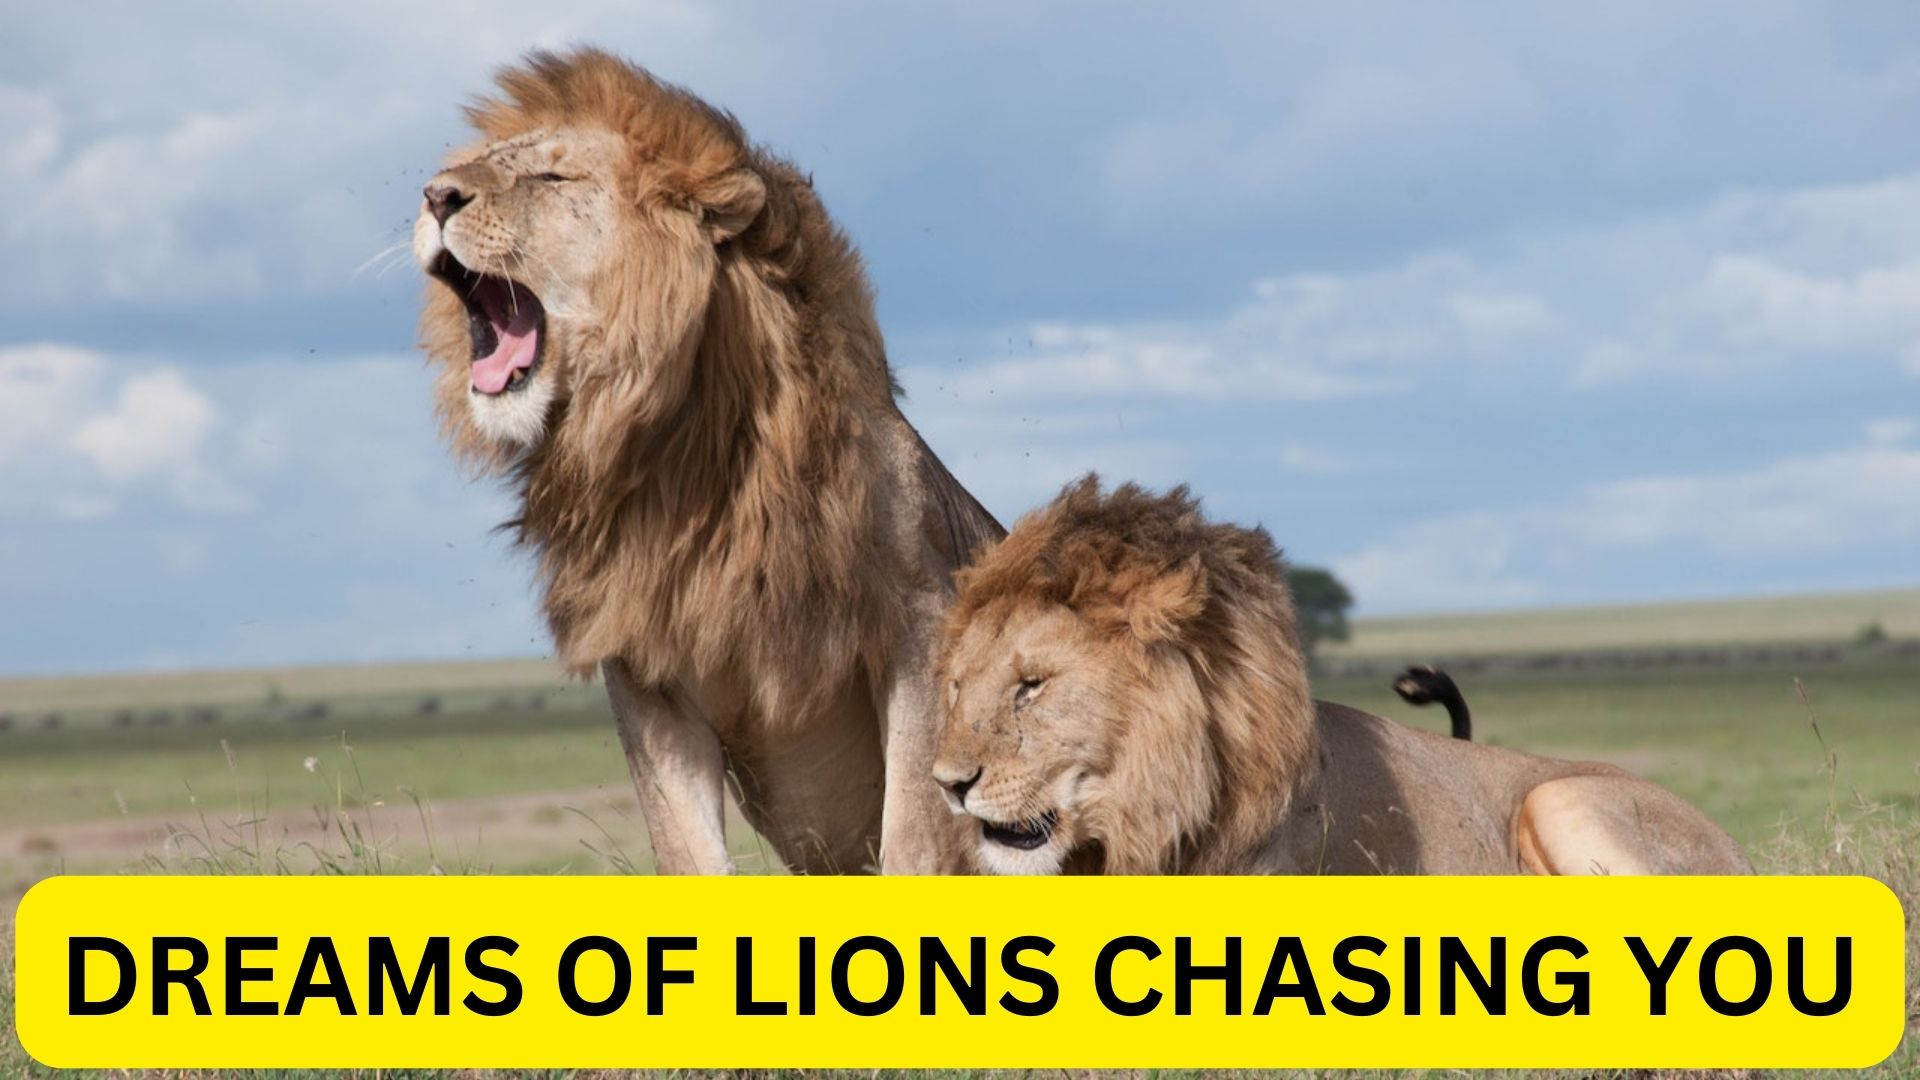 Dreams Of Lions Chasing You - Meaning And Symbolism